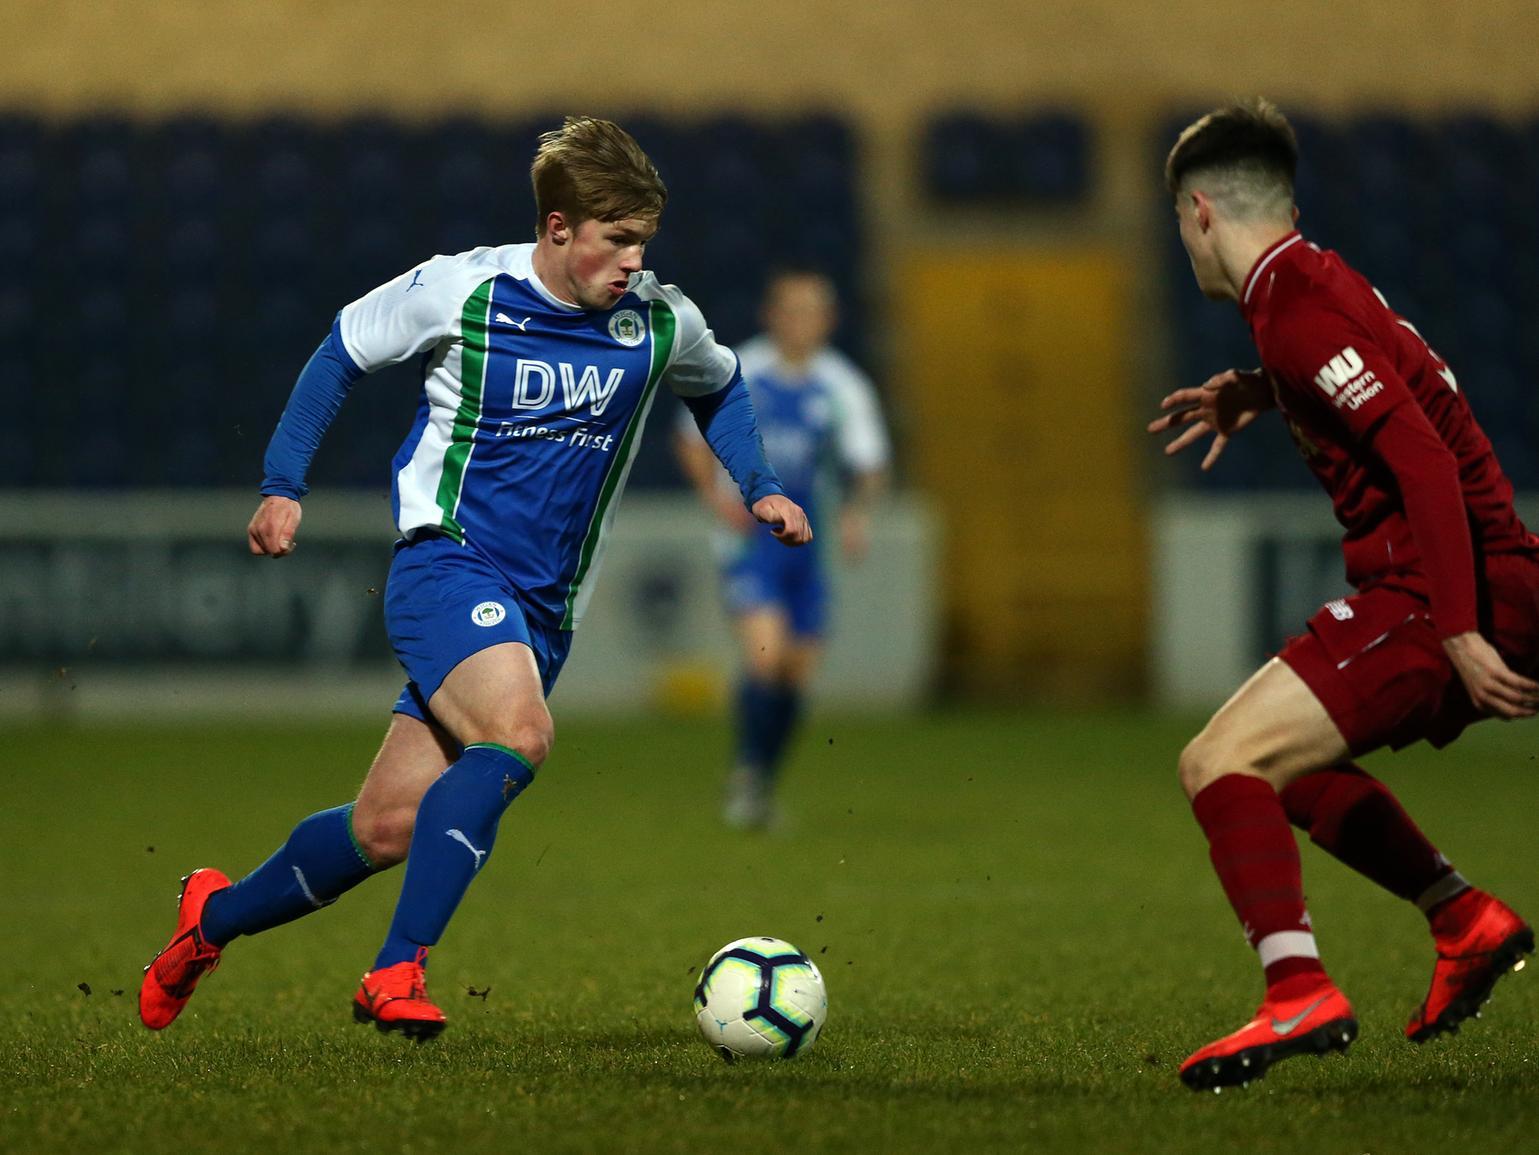 The Championship's latest wonderkid. The Wigan Athletic man is linked with all the Premier League big guns - including Chelsea, Manchester United, Liverpool, Tottenham and Everton.